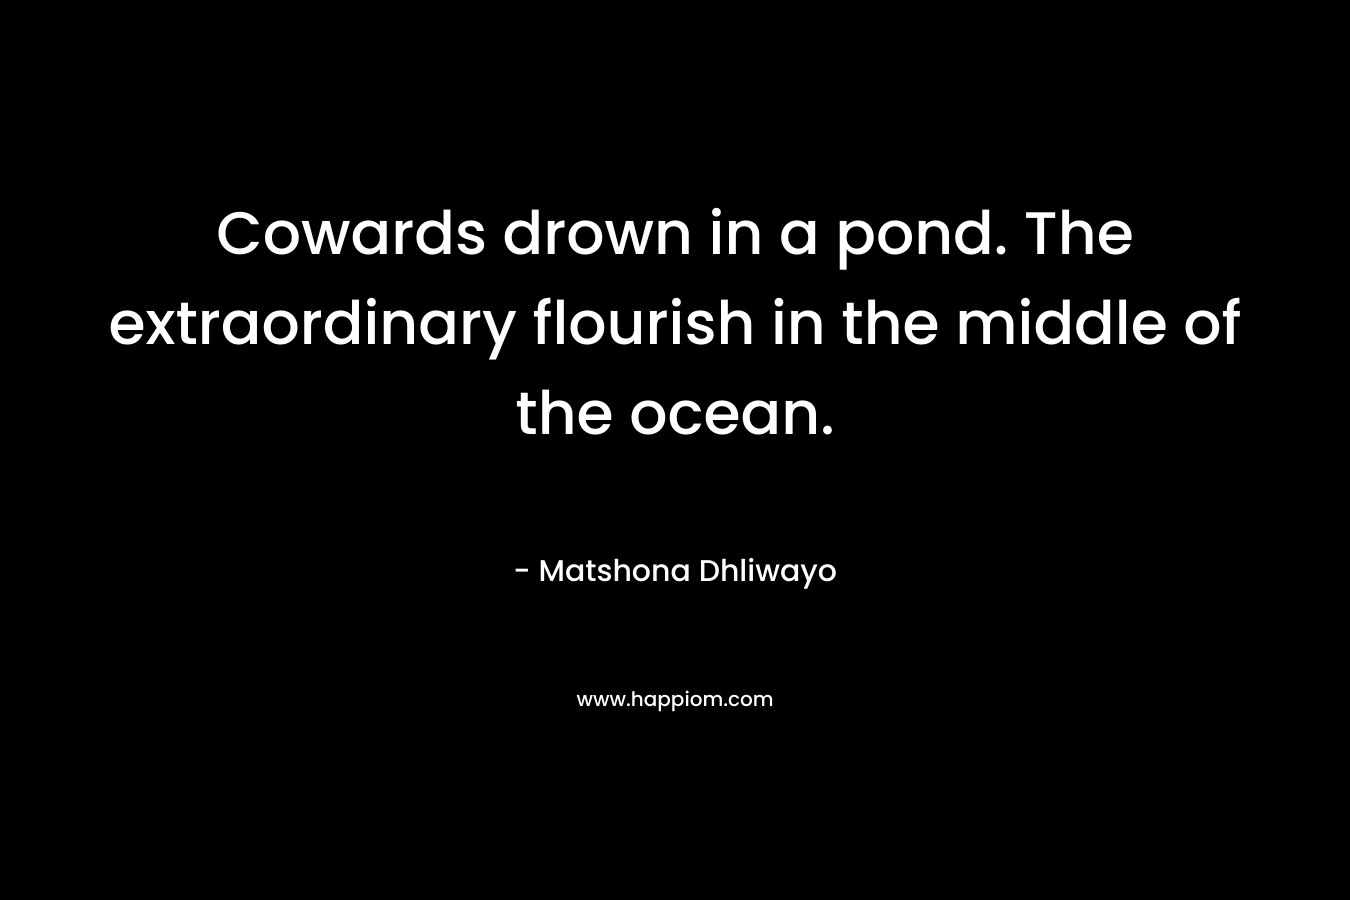 Cowards drown in a pond. The extraordinary flourish in the middle of the ocean. – Matshona Dhliwayo